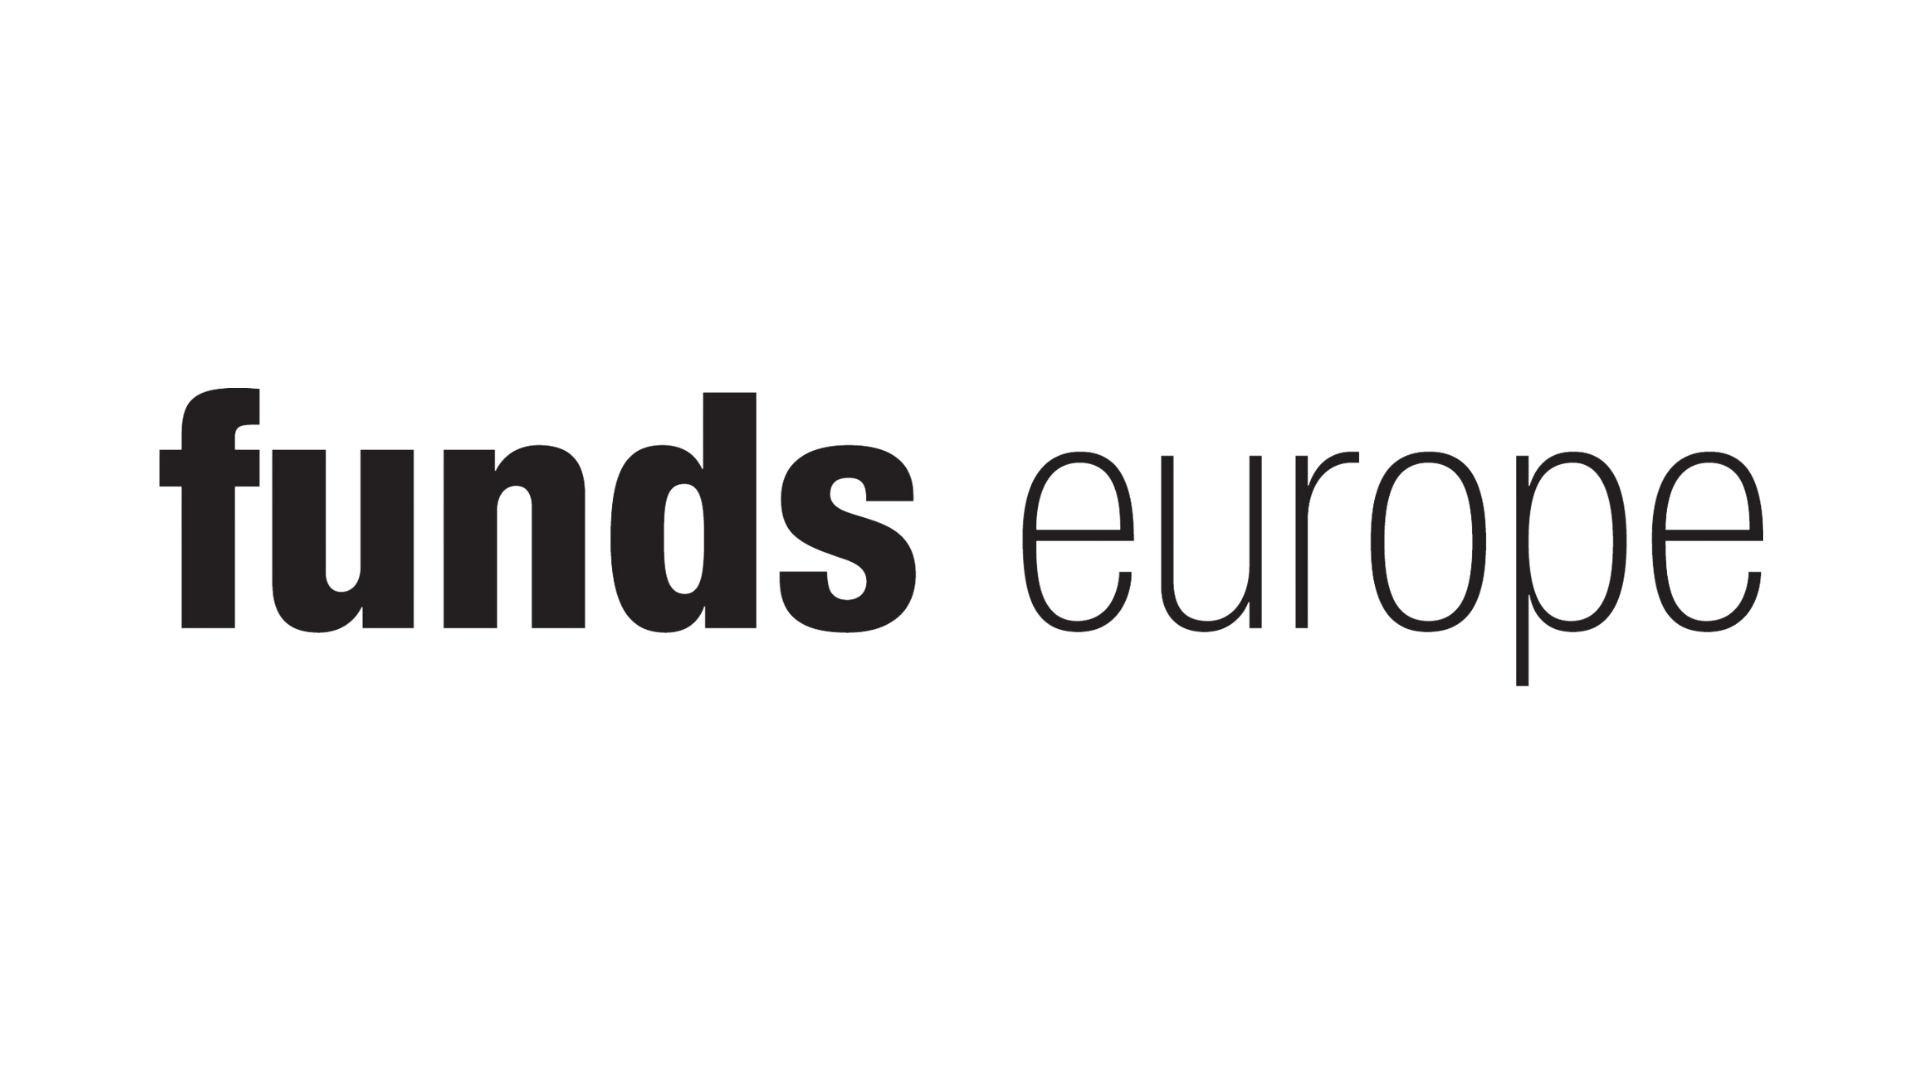 FUNDS EUROPE